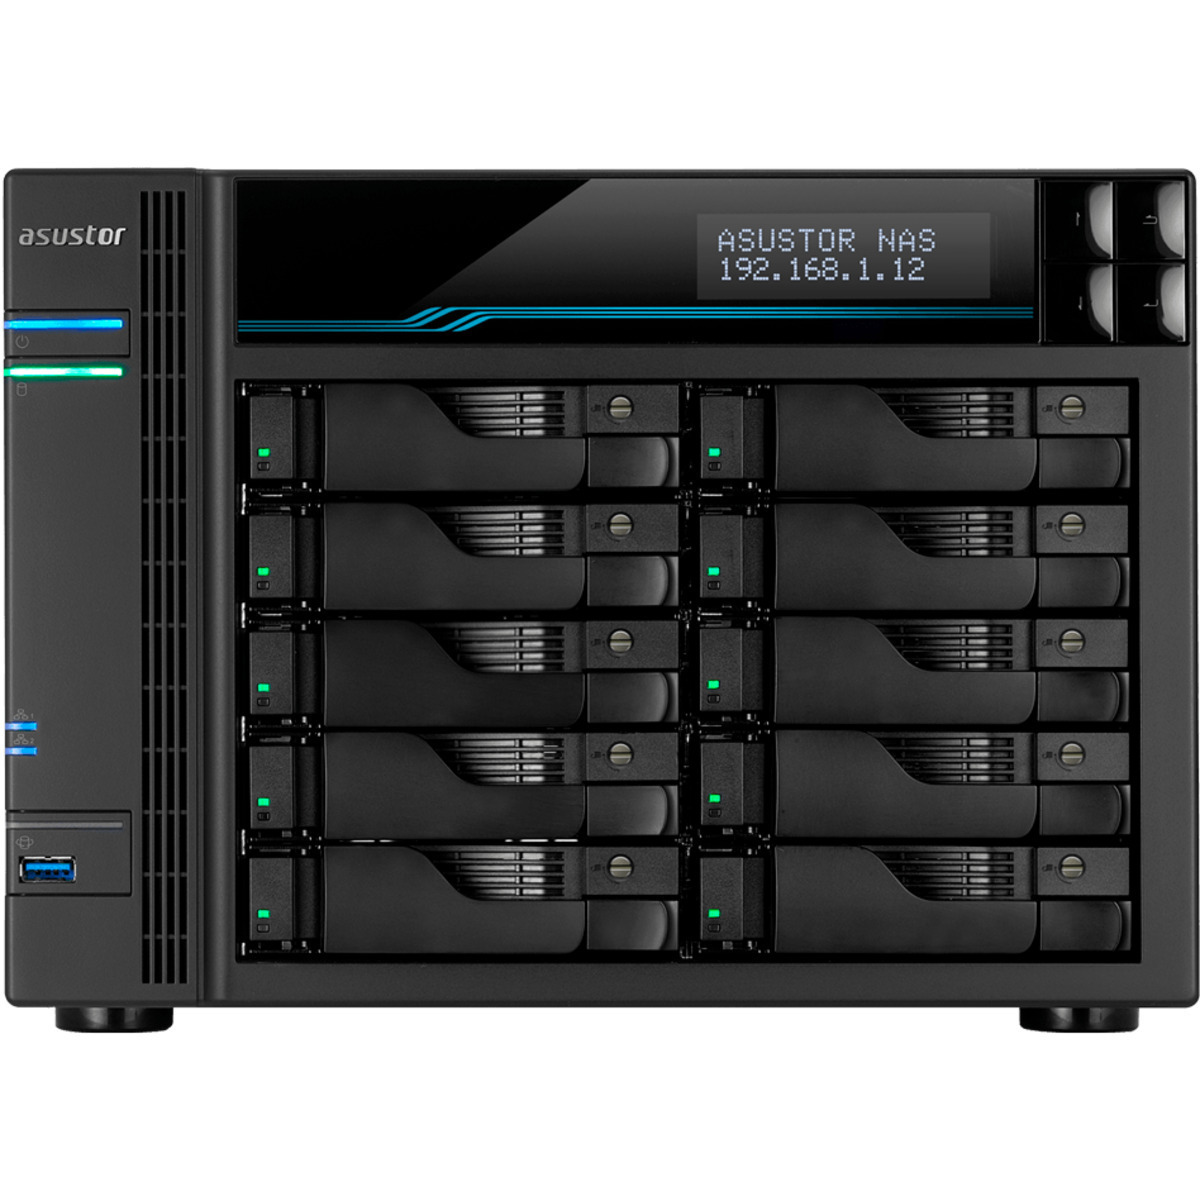 ASUSTOR AS7110T Lockerstor 10 Pro Desktop 10-Bay Multimedia / Power User / Business NAS - Network Attached Storage Device Burn-In Tested Configurations AS7110T Lockerstor 10 Pro